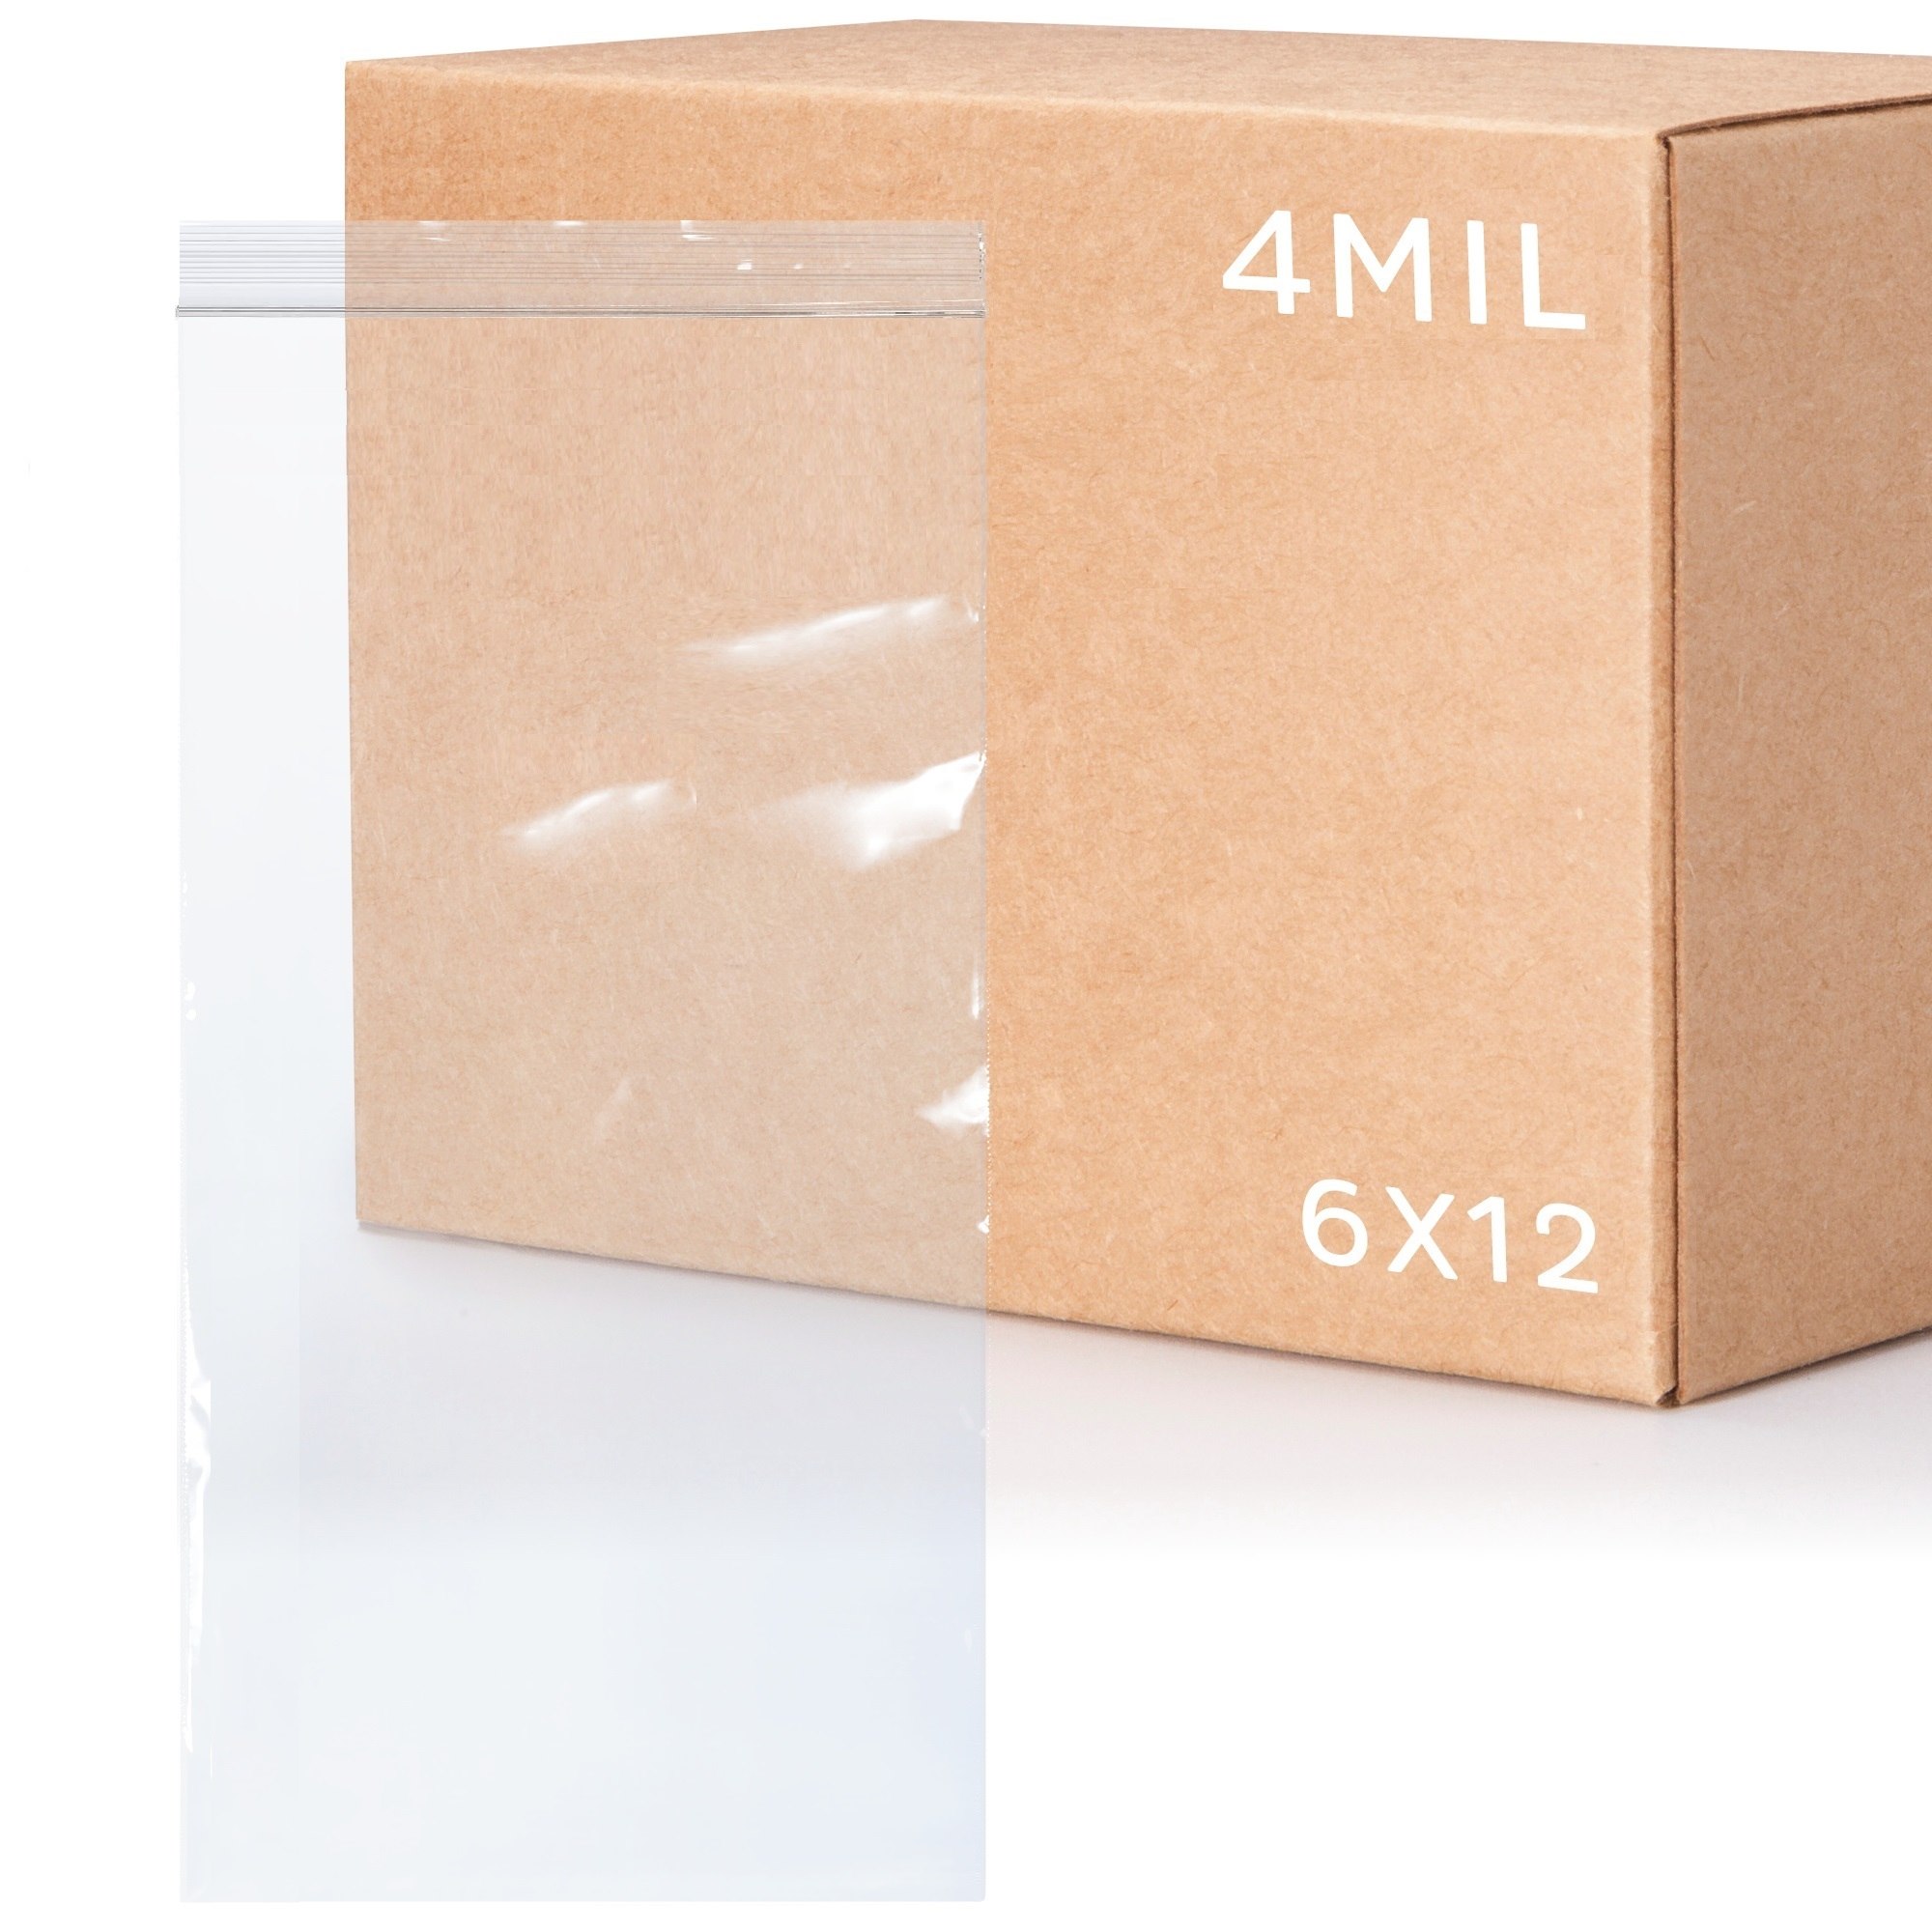 Top Quality 1,000 6"X12" 4MIL Thick Clear Zip Lock Reclosable ZipLock Bags 6X12 